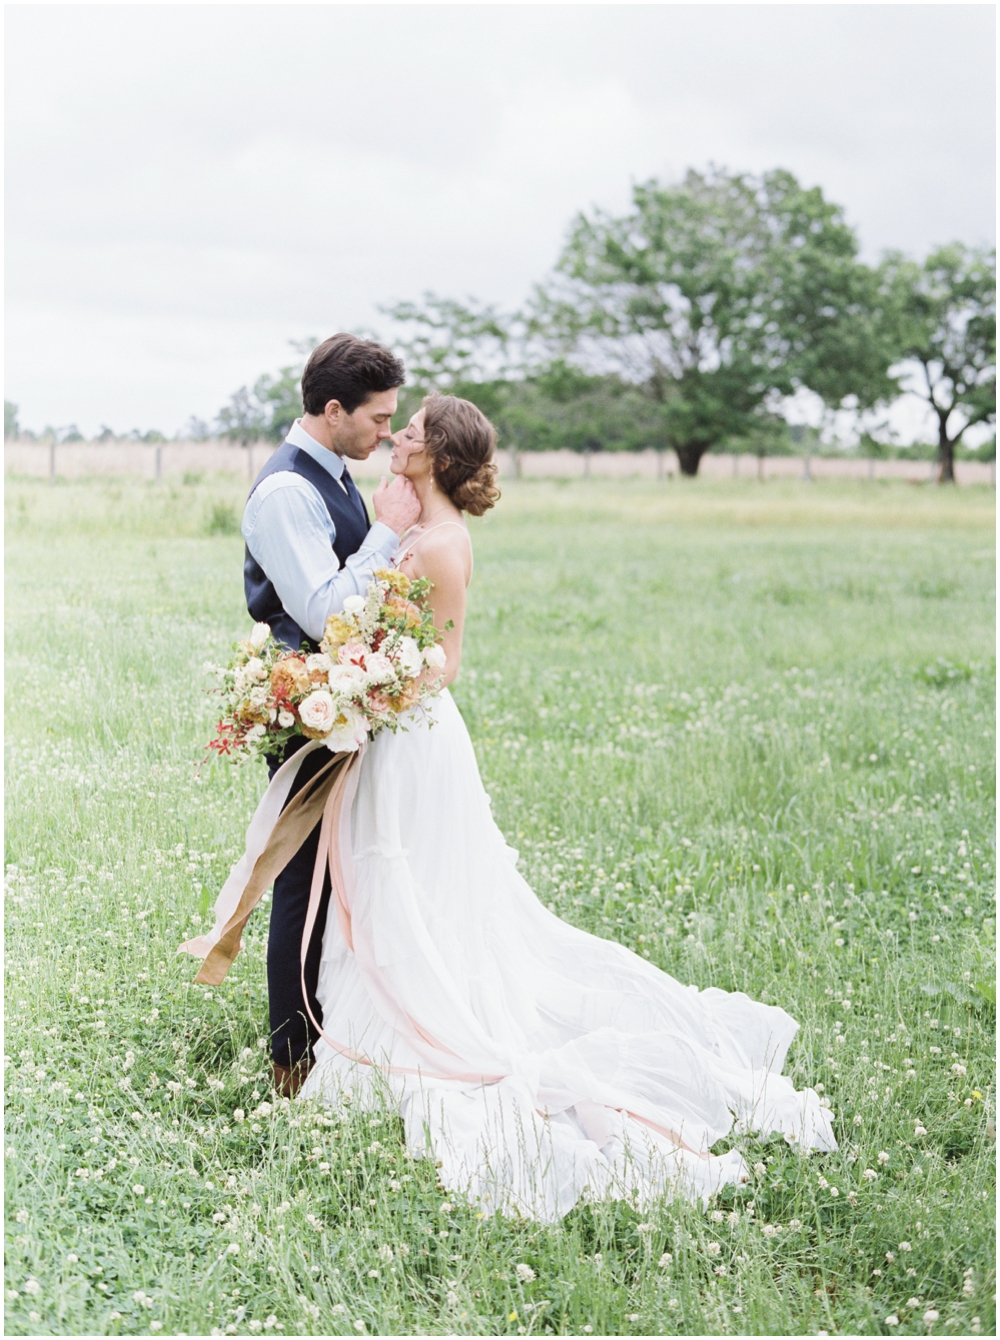 French Country Wedding Inspiration on Film